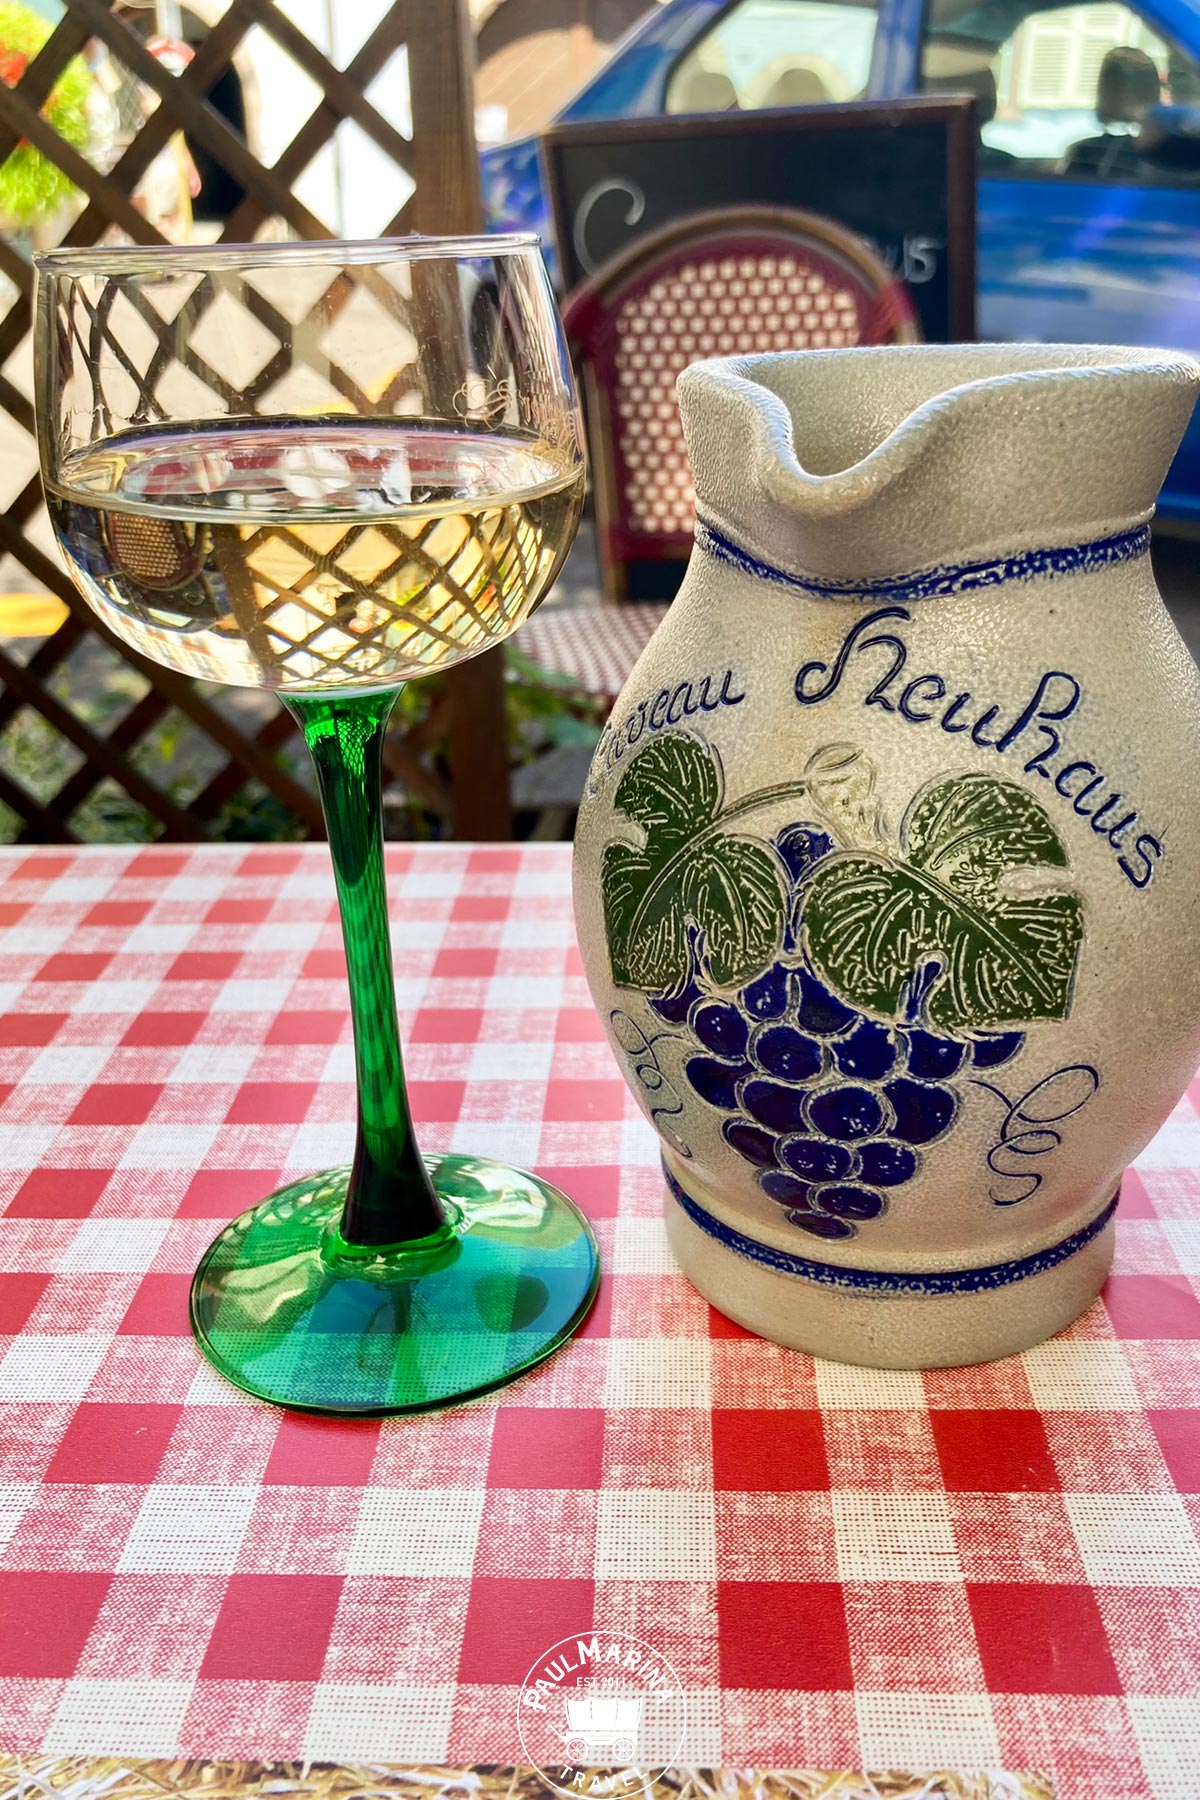 Traditional wine glass with green stem and pottery jug in Alsace